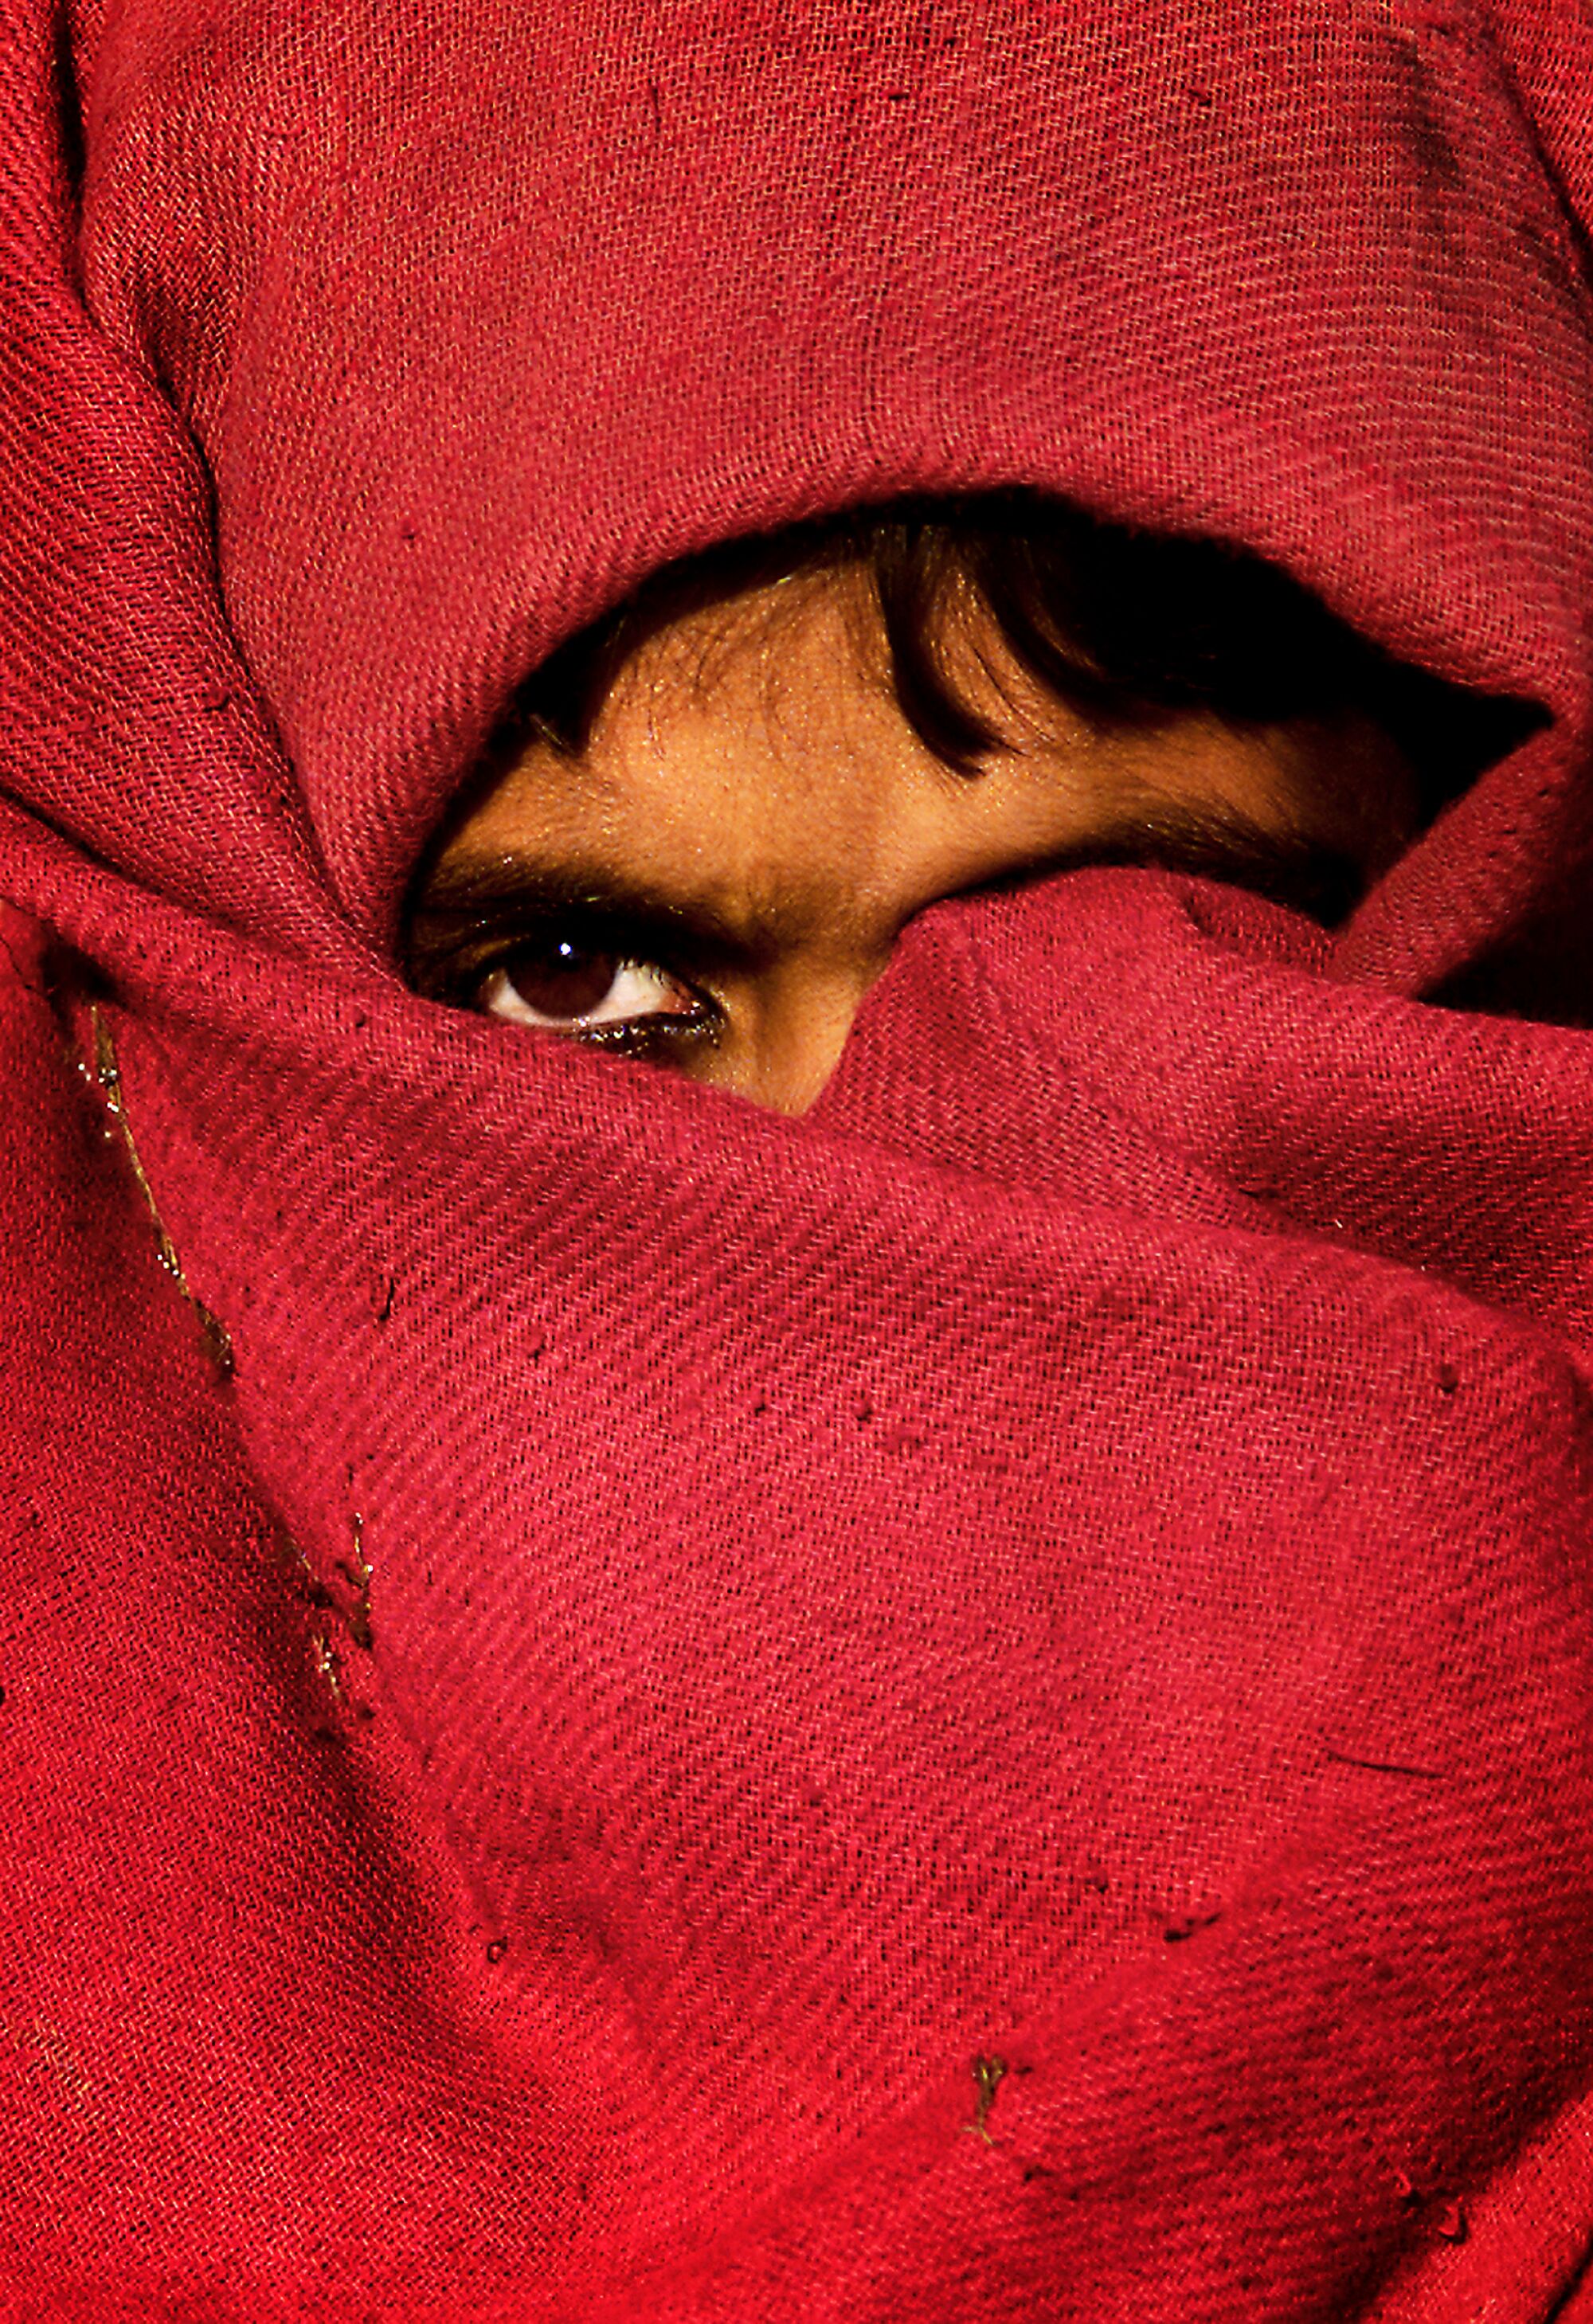 A girl with her face mostly covered by red cloth